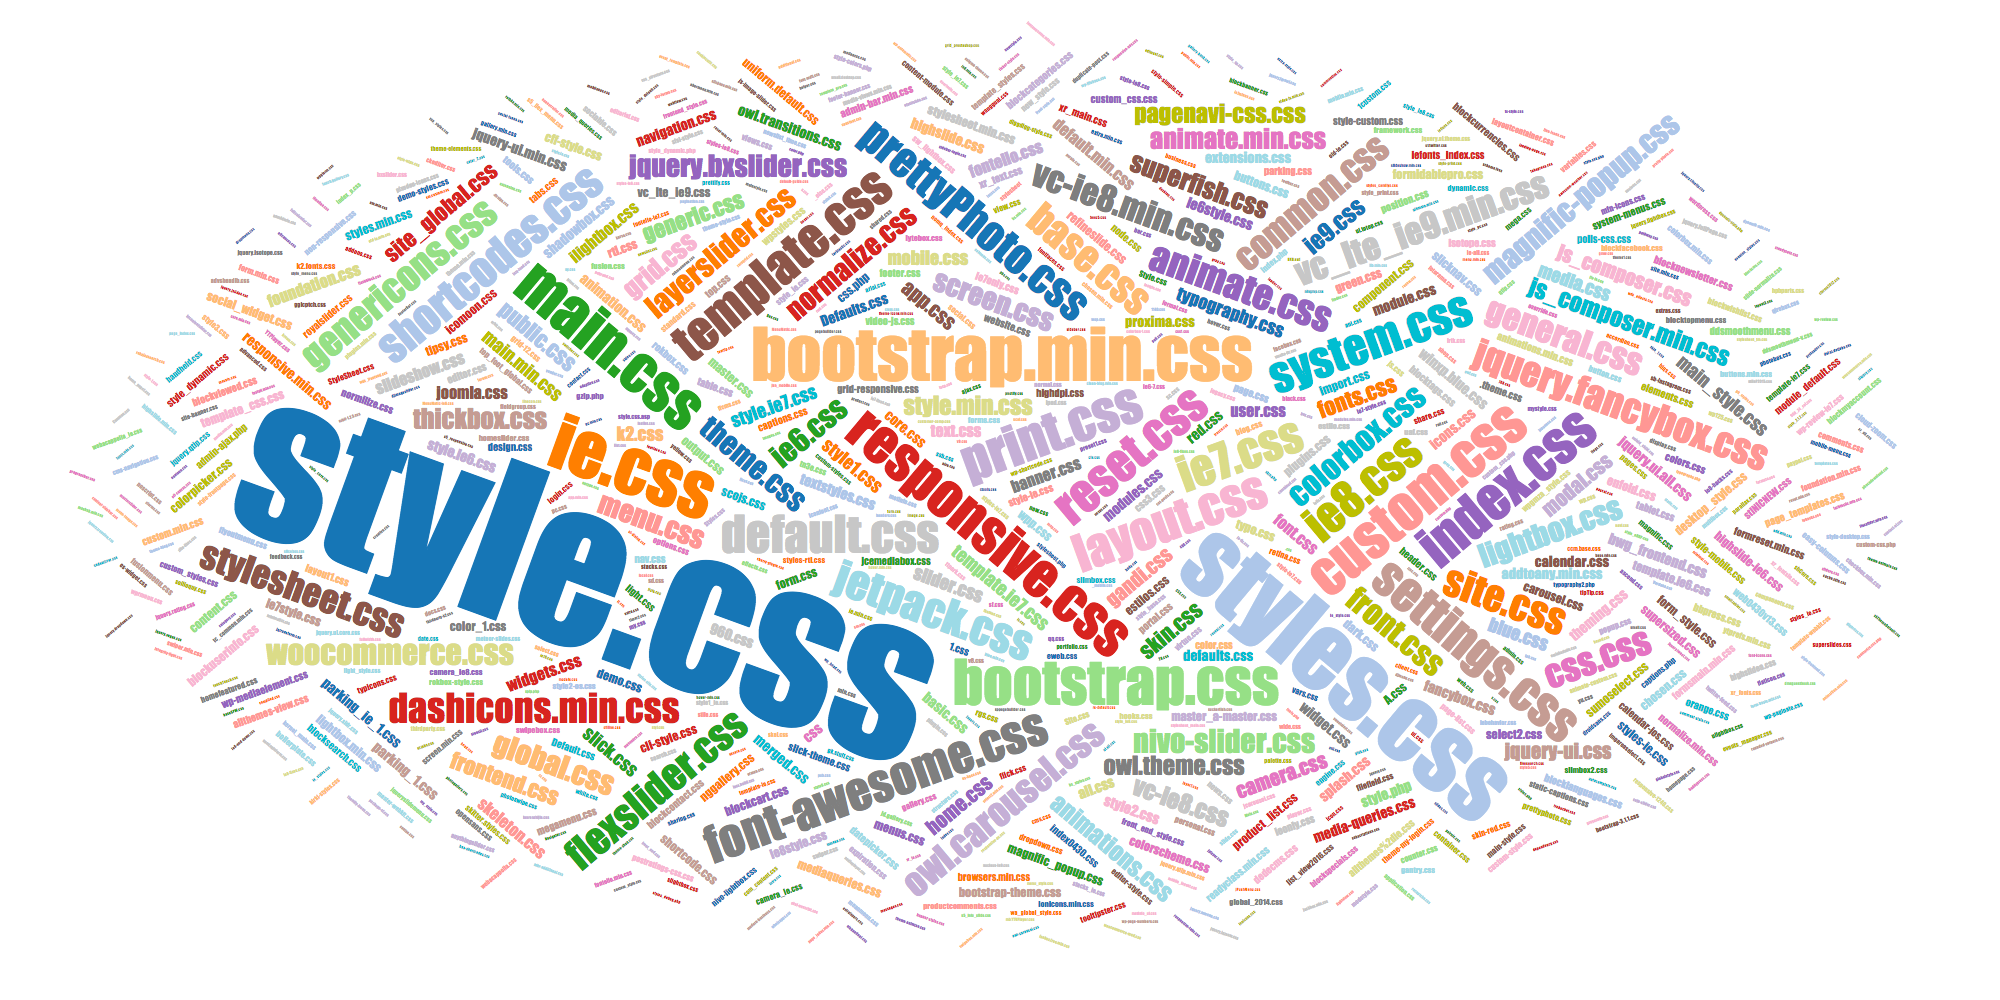 Popular names of CSS files jquery.fancybox.css, jetpack.css, etc.